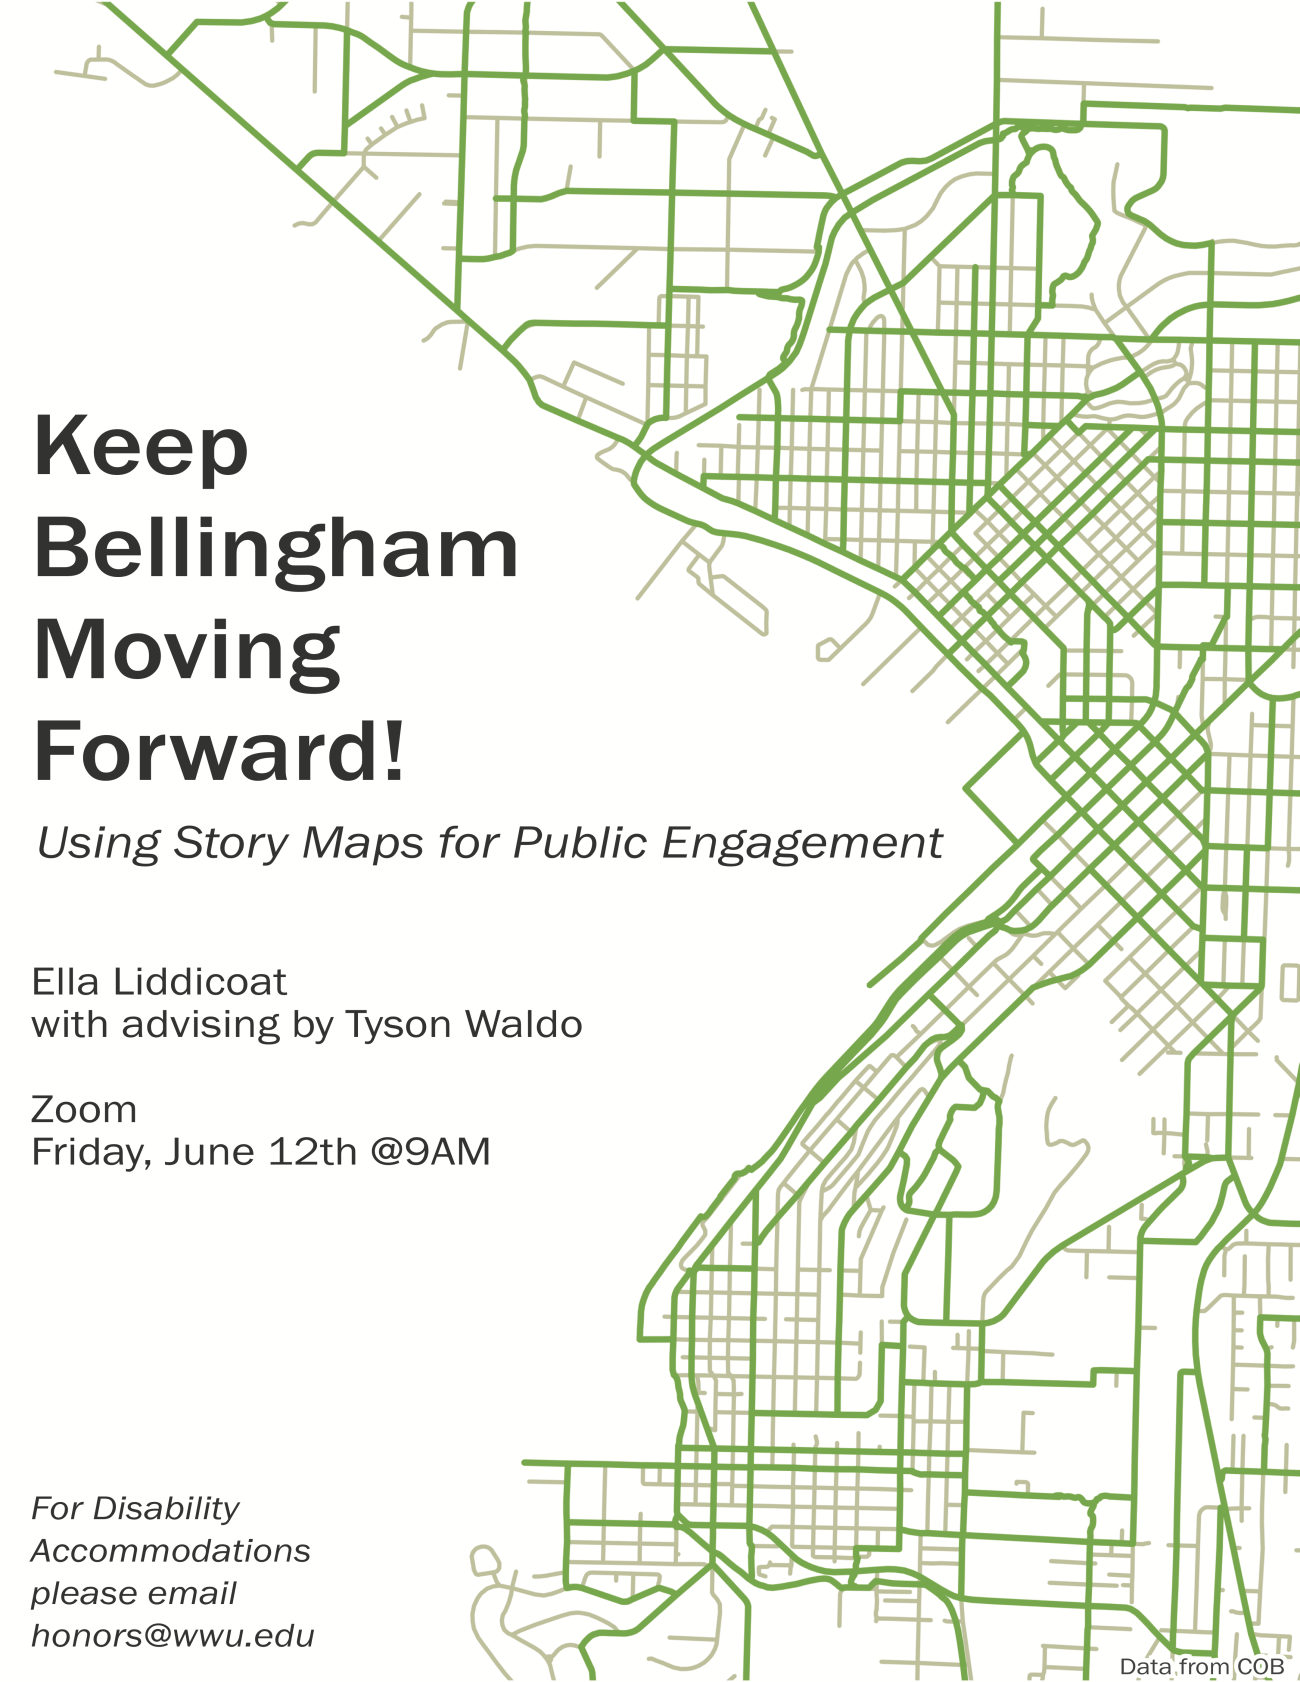 Image: GIS map with a white background overlaid with Bellingham roads in light gray and Bellingham bike lanes in green. Data comes from the City of Bellingham website. Text: “Keep Bellingham Moving Forward! Using Story Maps for Public Engagement”  “Ella Liddicoat with advising by Tyson Waldo”  “Zoom, Friday, June 12th at 9AM”  “For Disability Accommodations please email honors@wwu.edu”